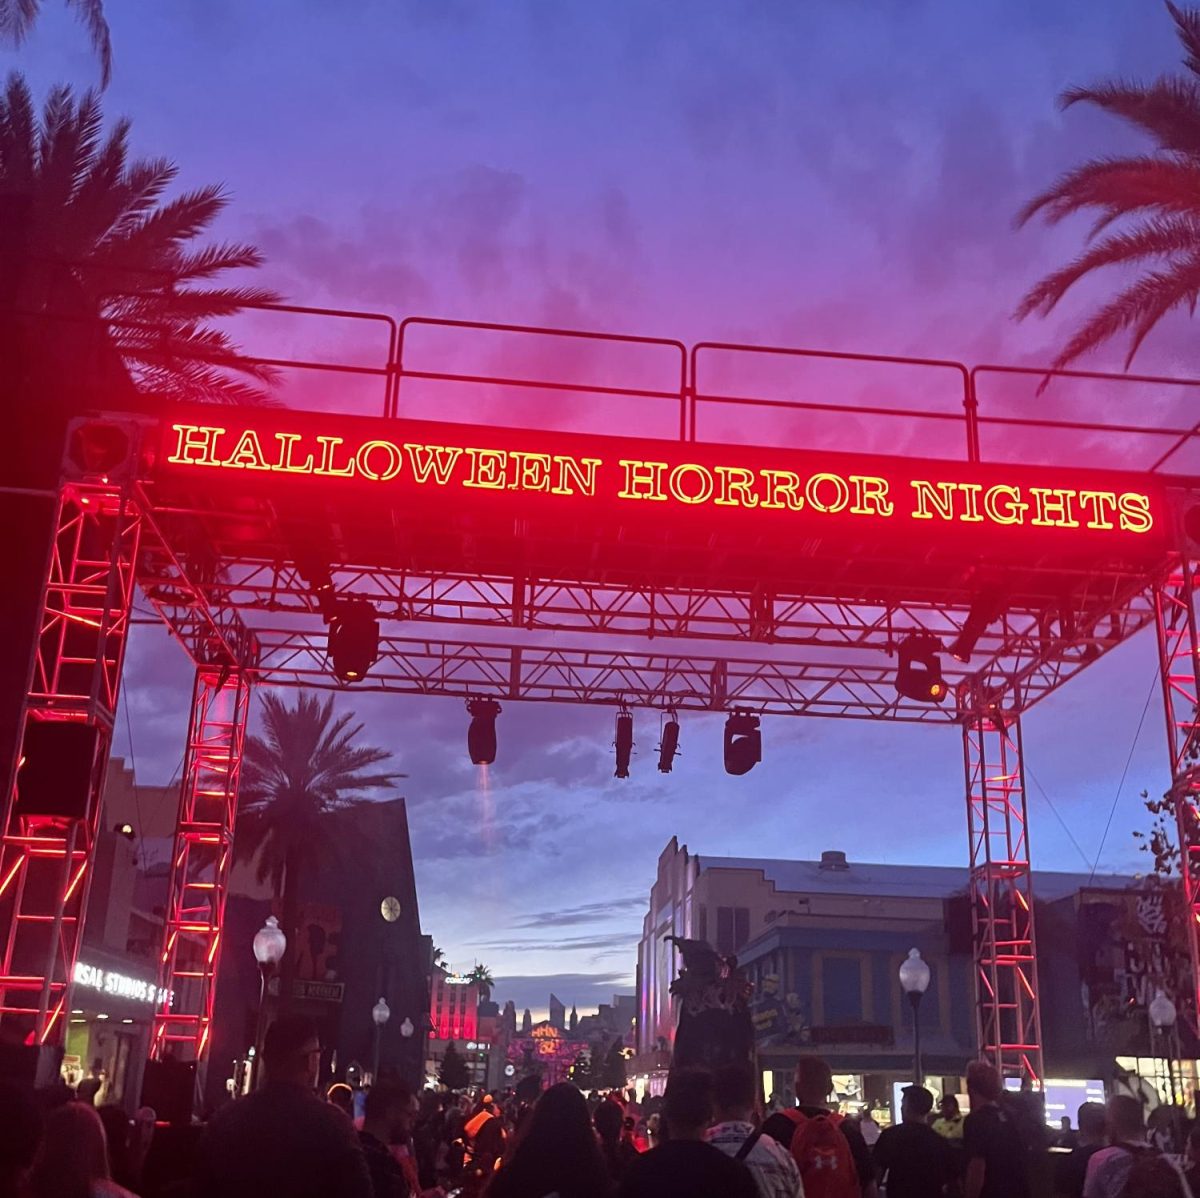 The+light-up+Halloween+Horror+Nights+sign+at+the+park